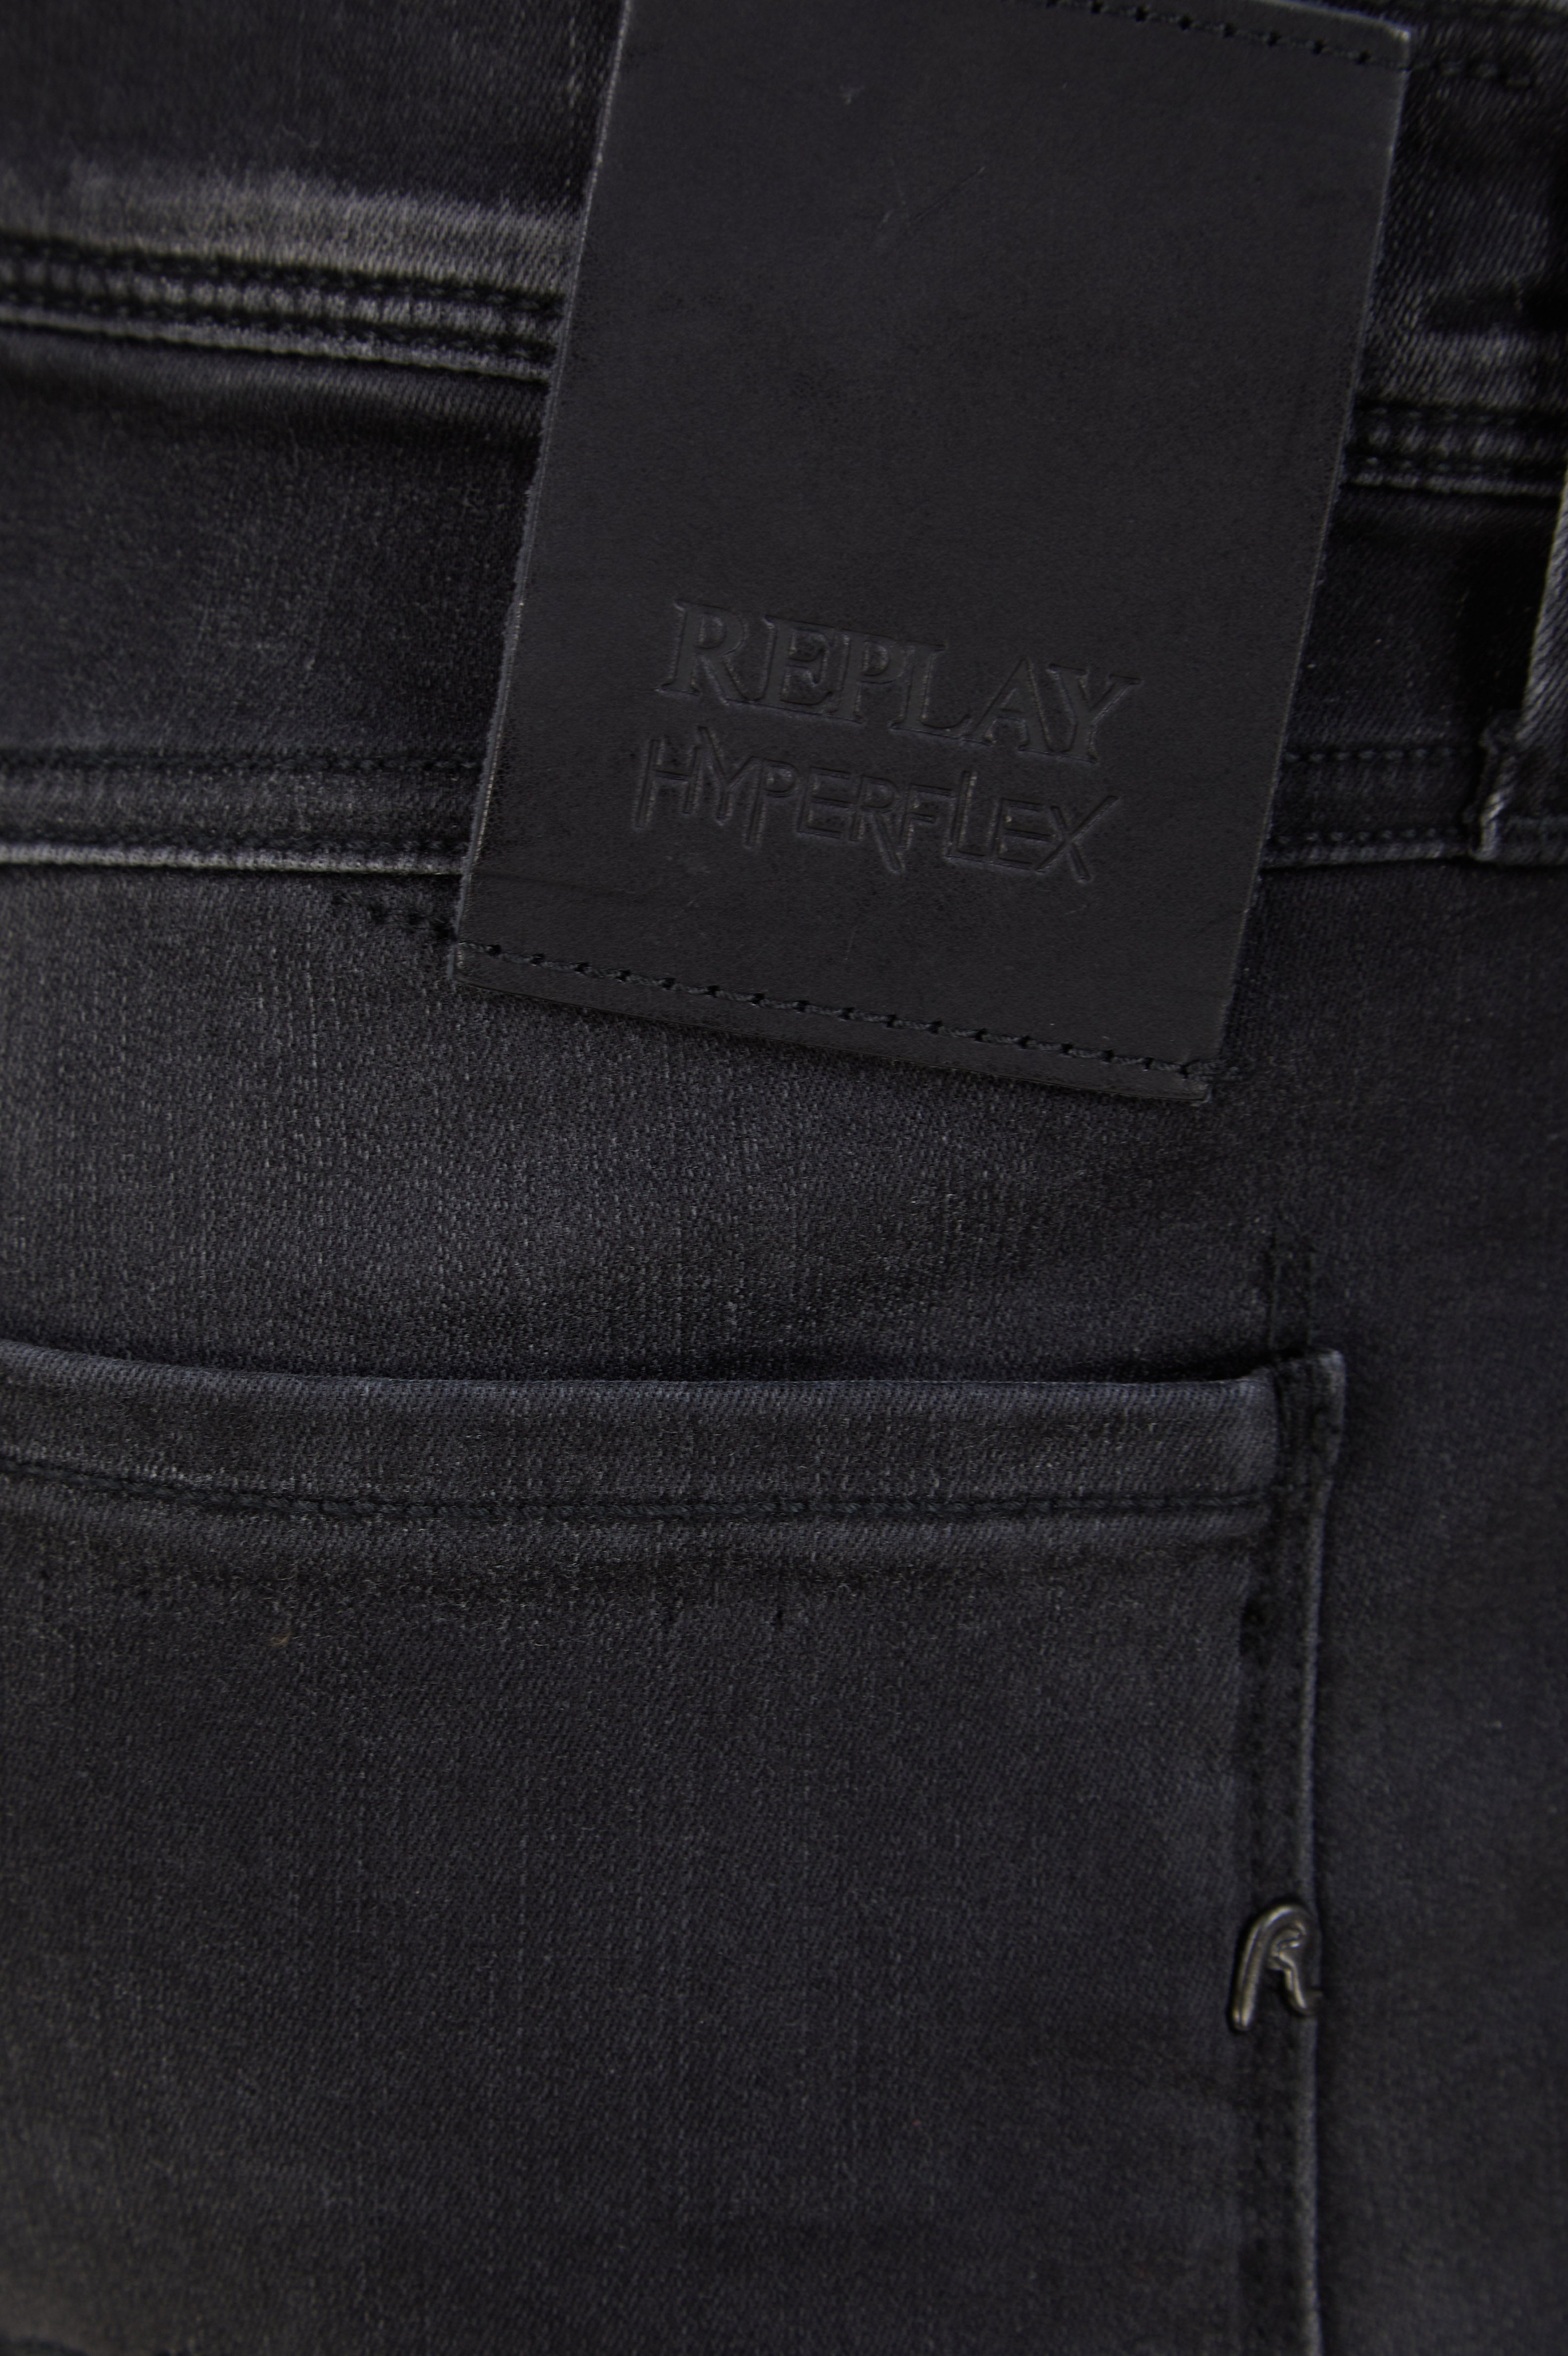 Load image into Gallery viewer, Replay Hyperflex Anbass X Lite Jean Black
